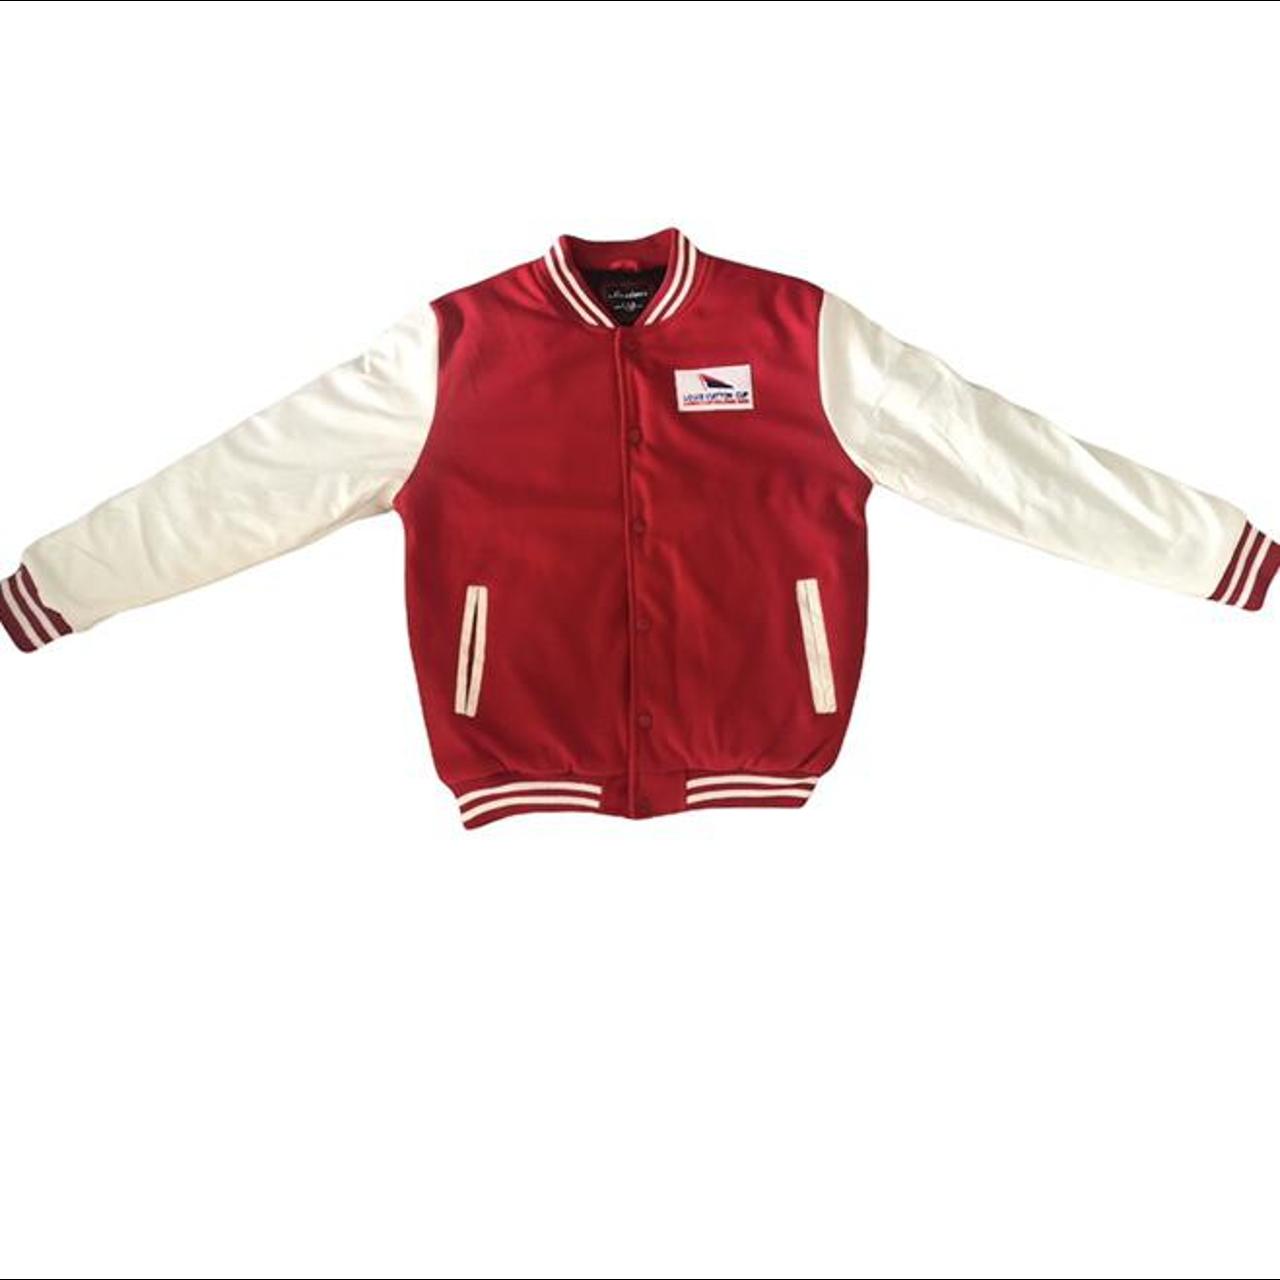 lv red and white jacket